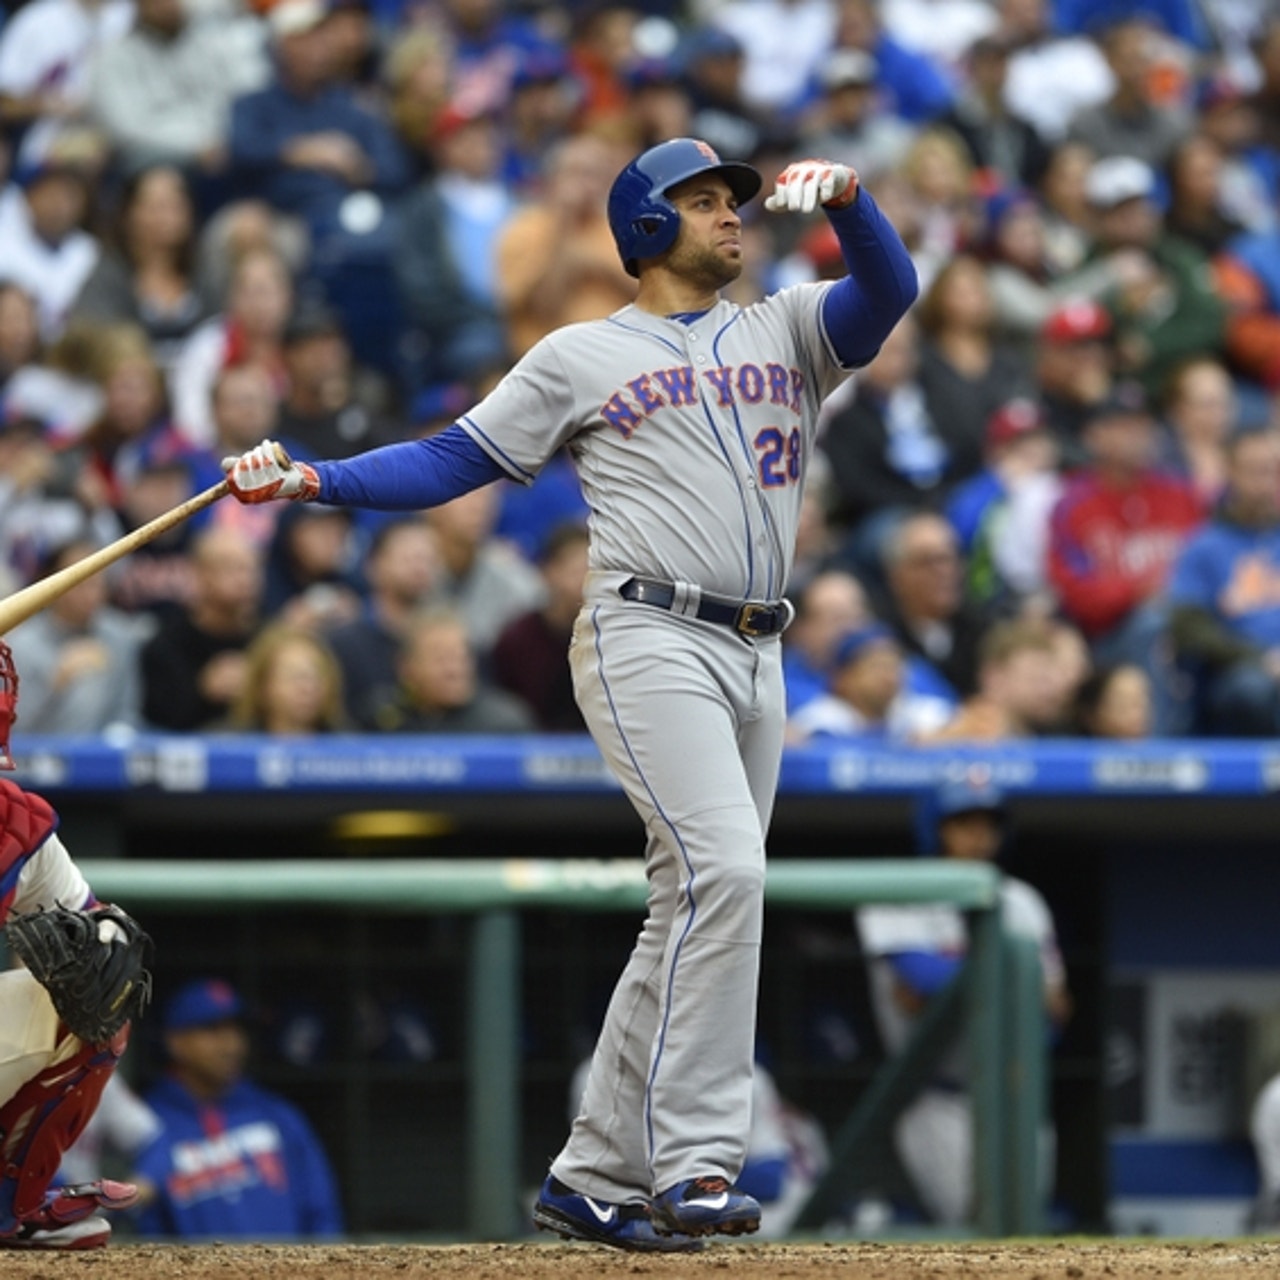 Mets will likely play James Loney at first base in Wild Card game